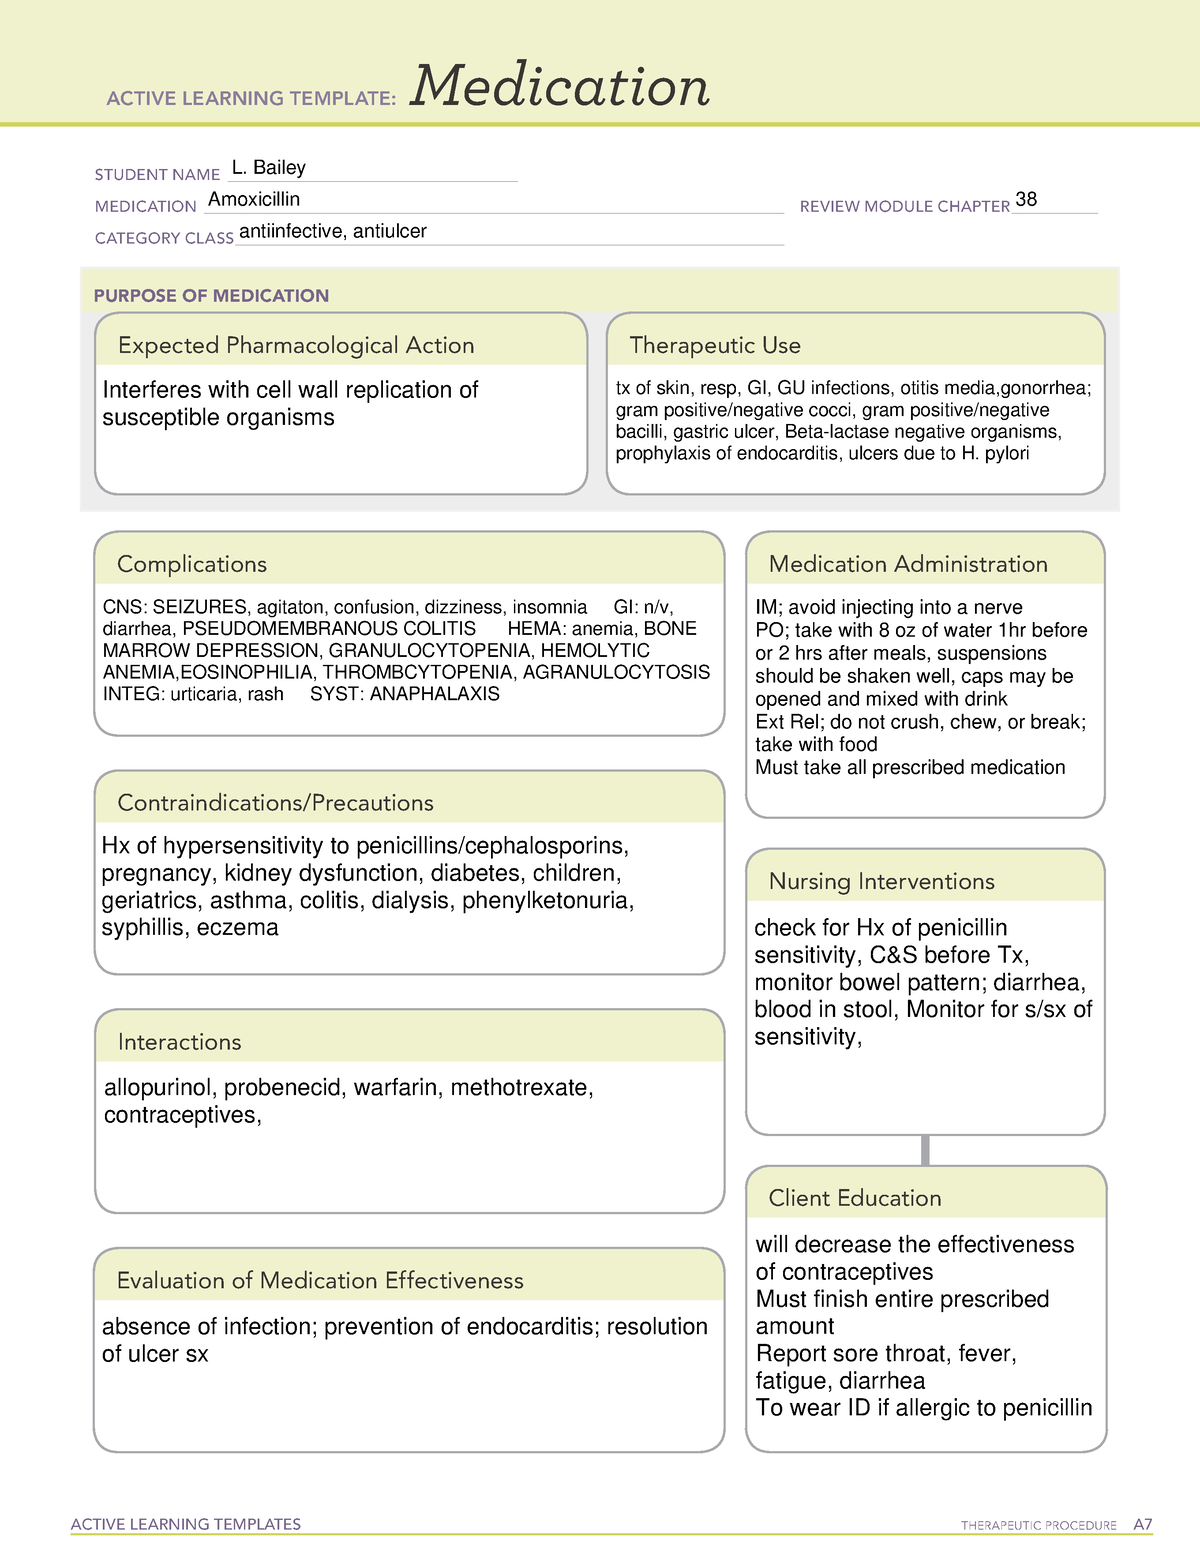 Active Learning Template medication amoxicillin ACTIVE LEARNING